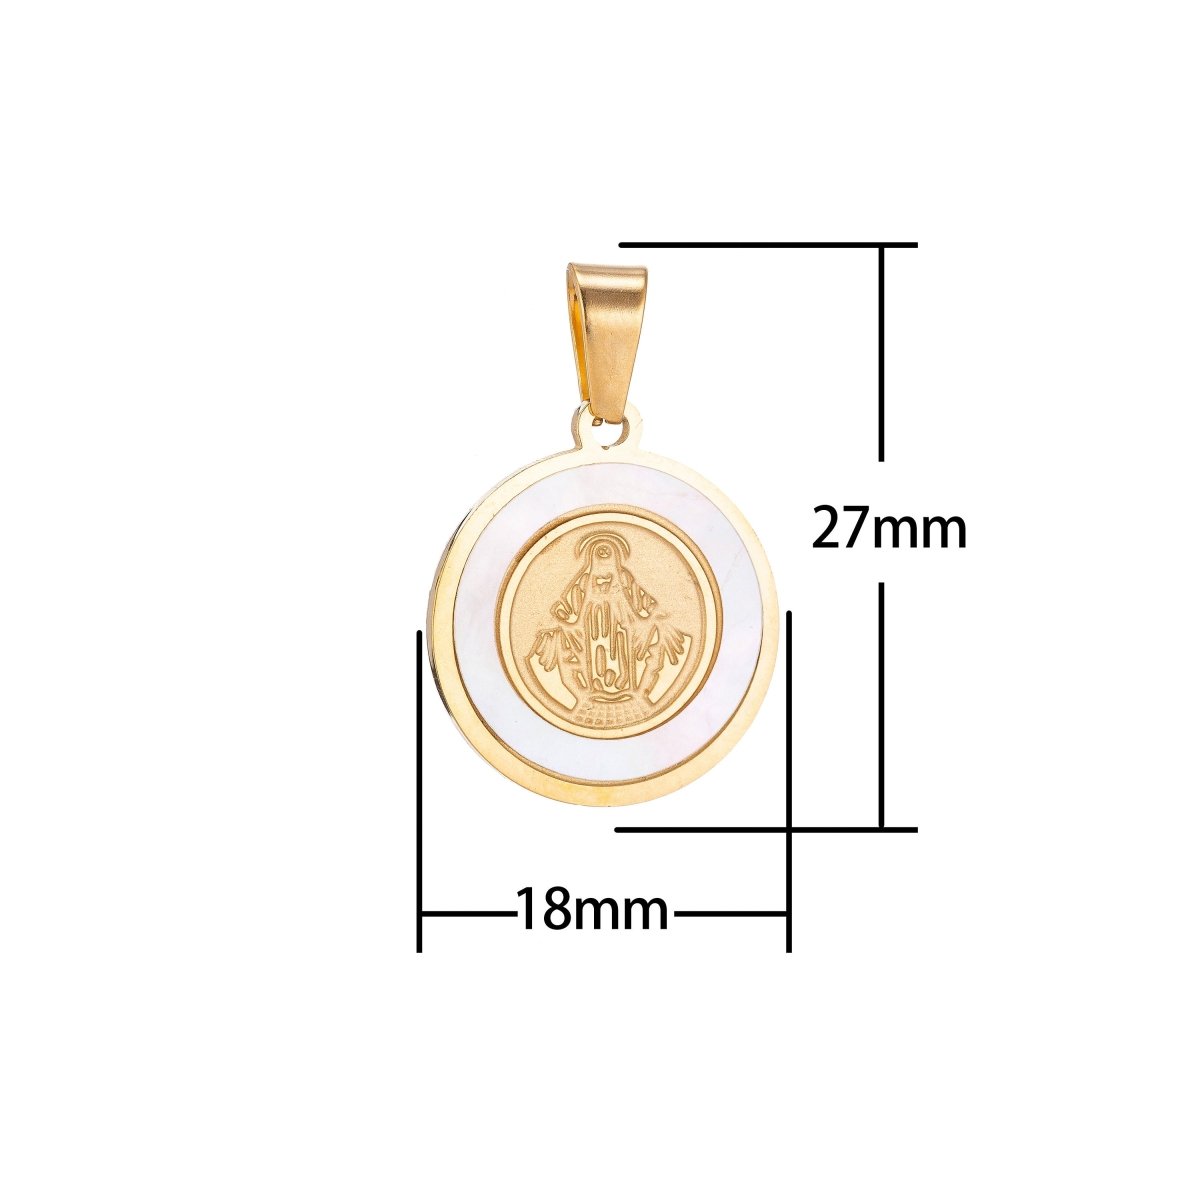 Gold fill Miraculous Lady Charm Pendant / Christian Gift / Religious Jewelry / Medallion Coin Necklace / Christening Gift/ Catholic gift J-394 - DLUXCA